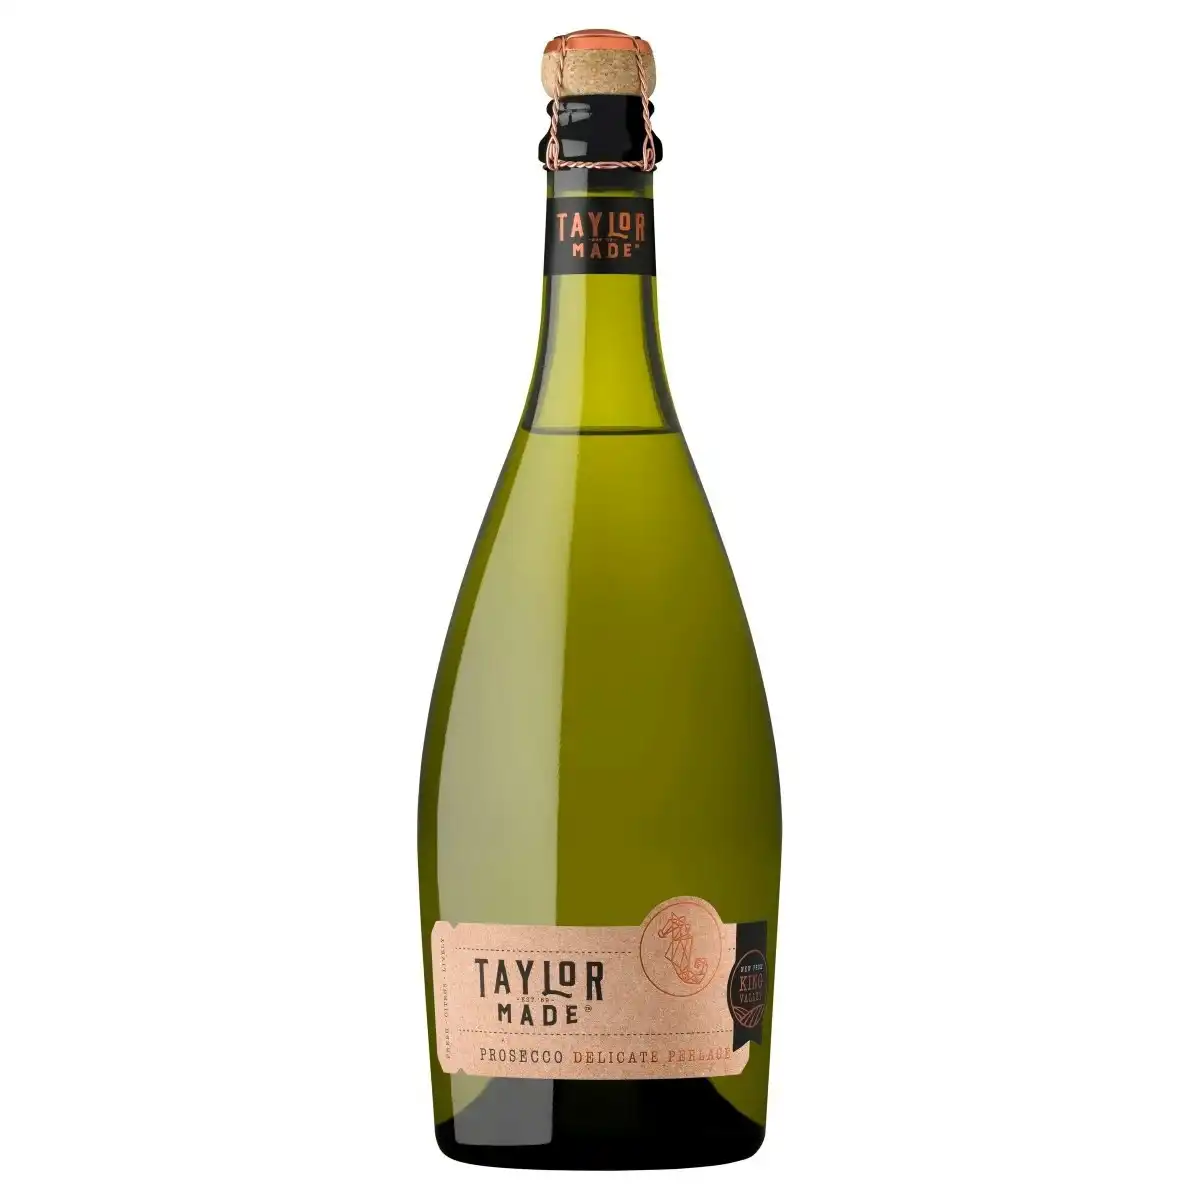 Taylors Taylor Made Prosecco (750mL)